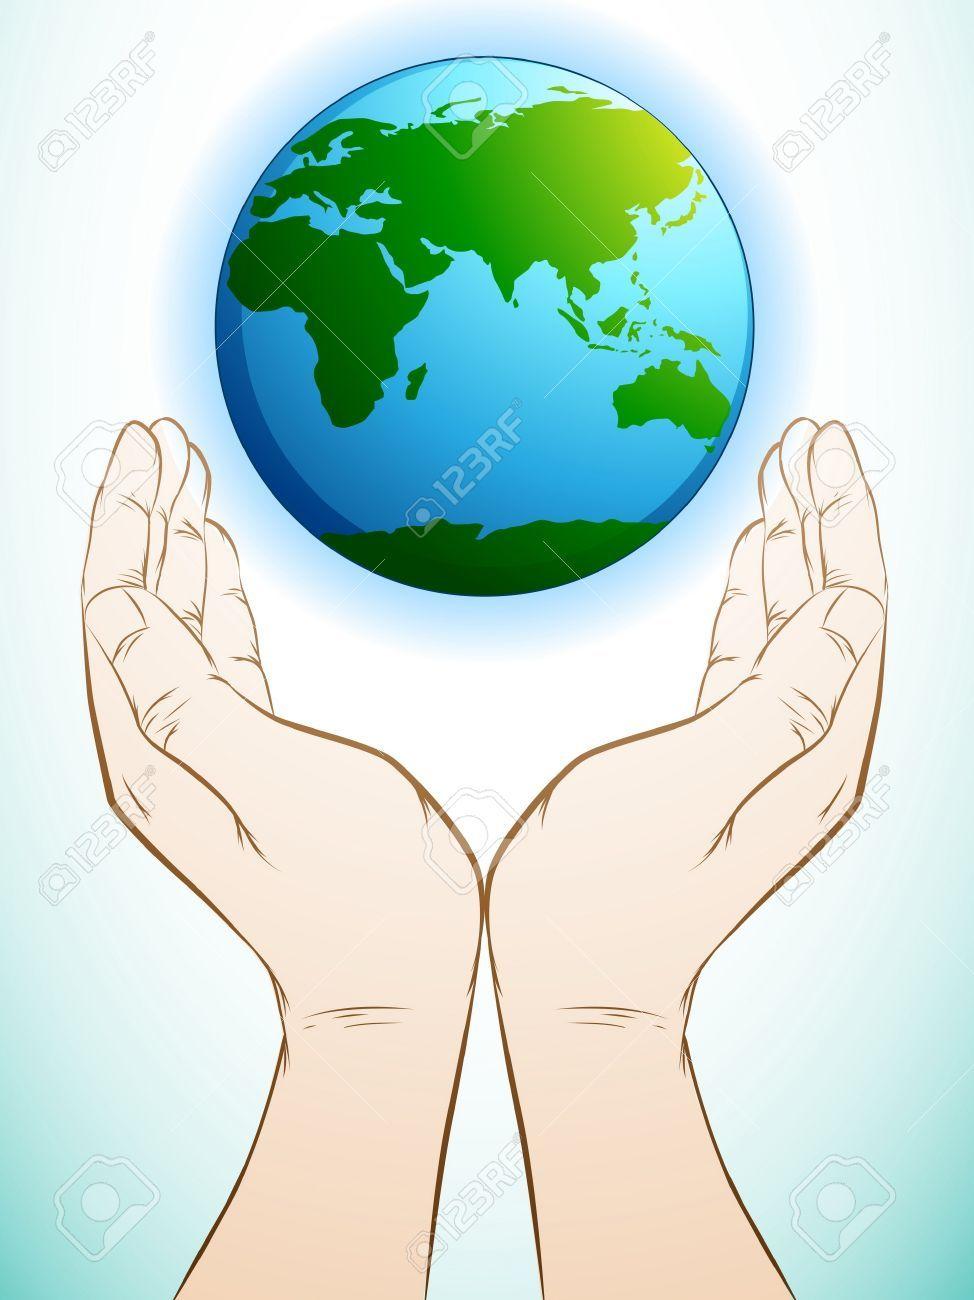 Hands Holding Globe Logo - Hand Holding Globe Clipart | Great free clipart, silhouette ...